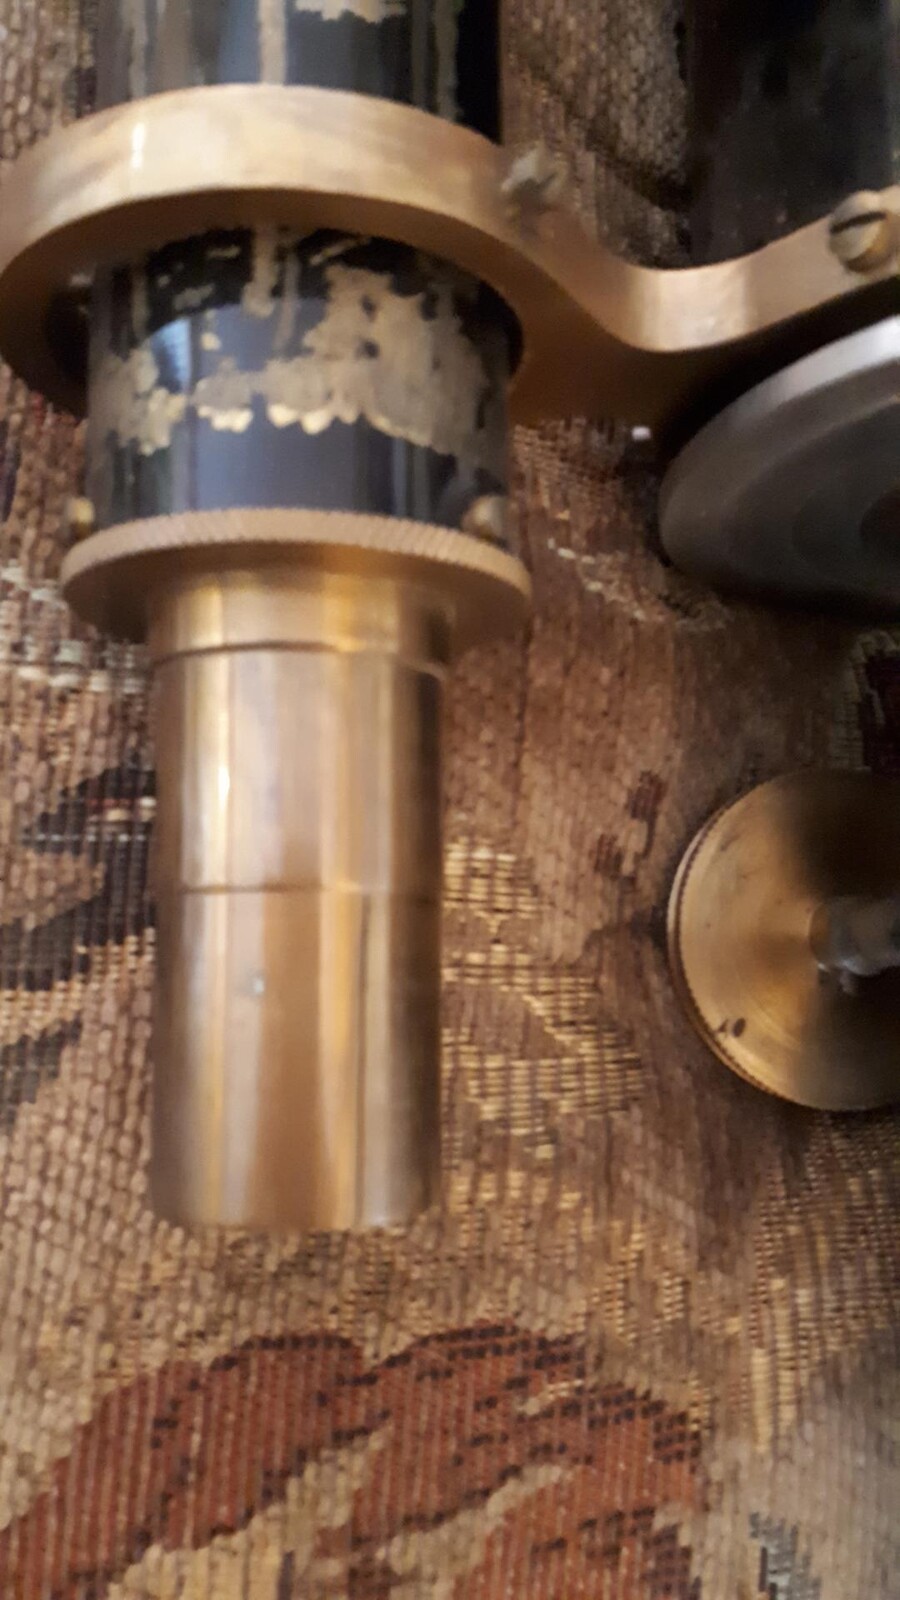 Back view of finderscope